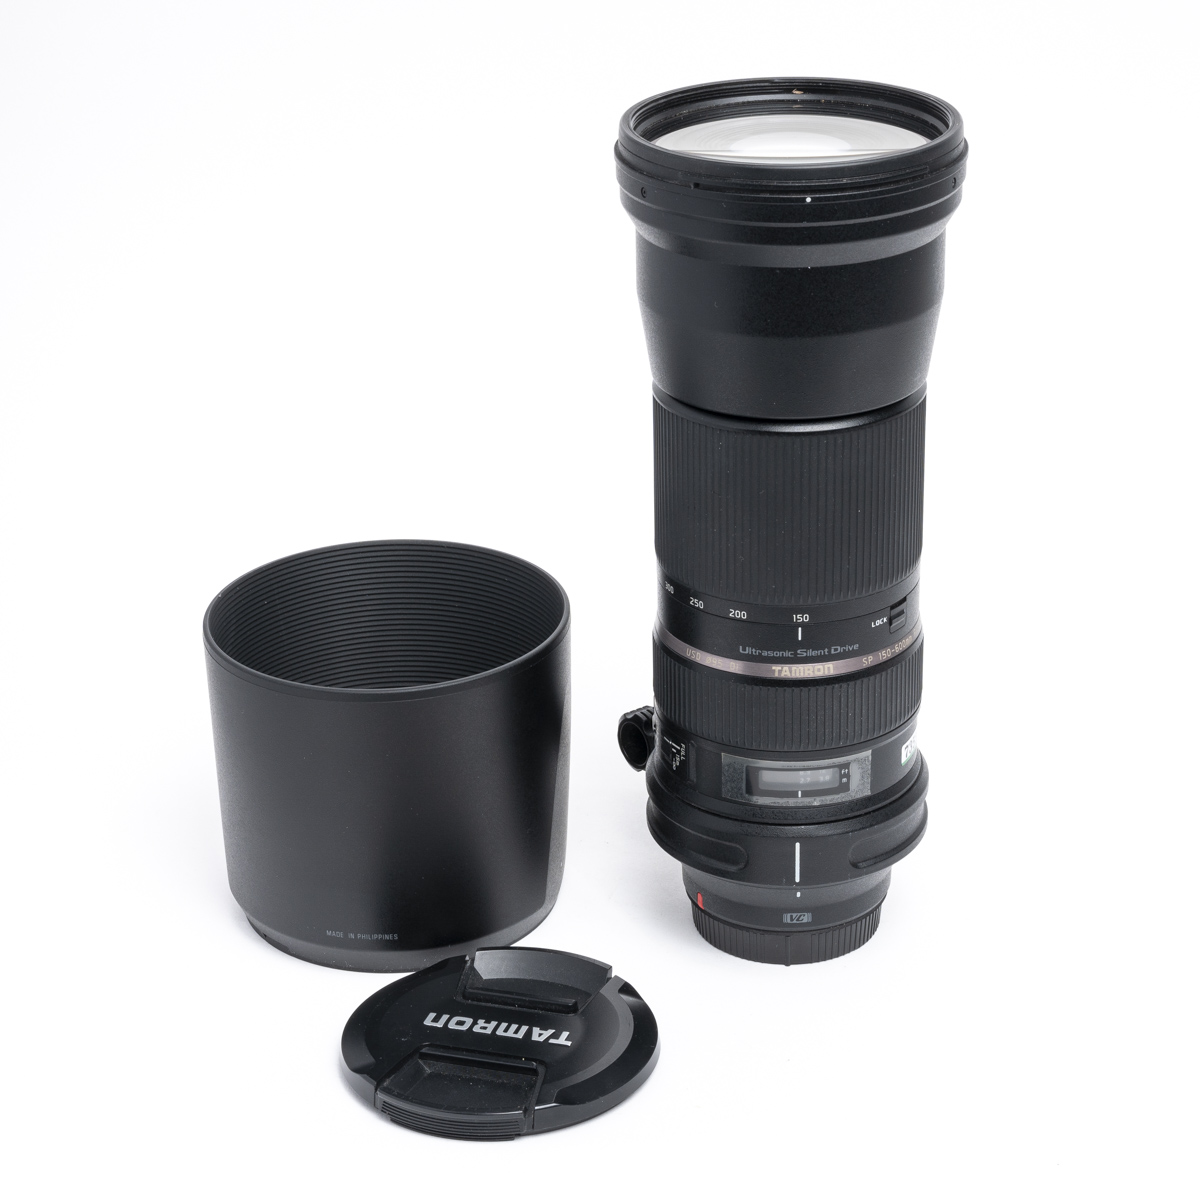 Used Tamron SP150-600mm f/5.6-6.3 Di VC USD lens for Canon EOS